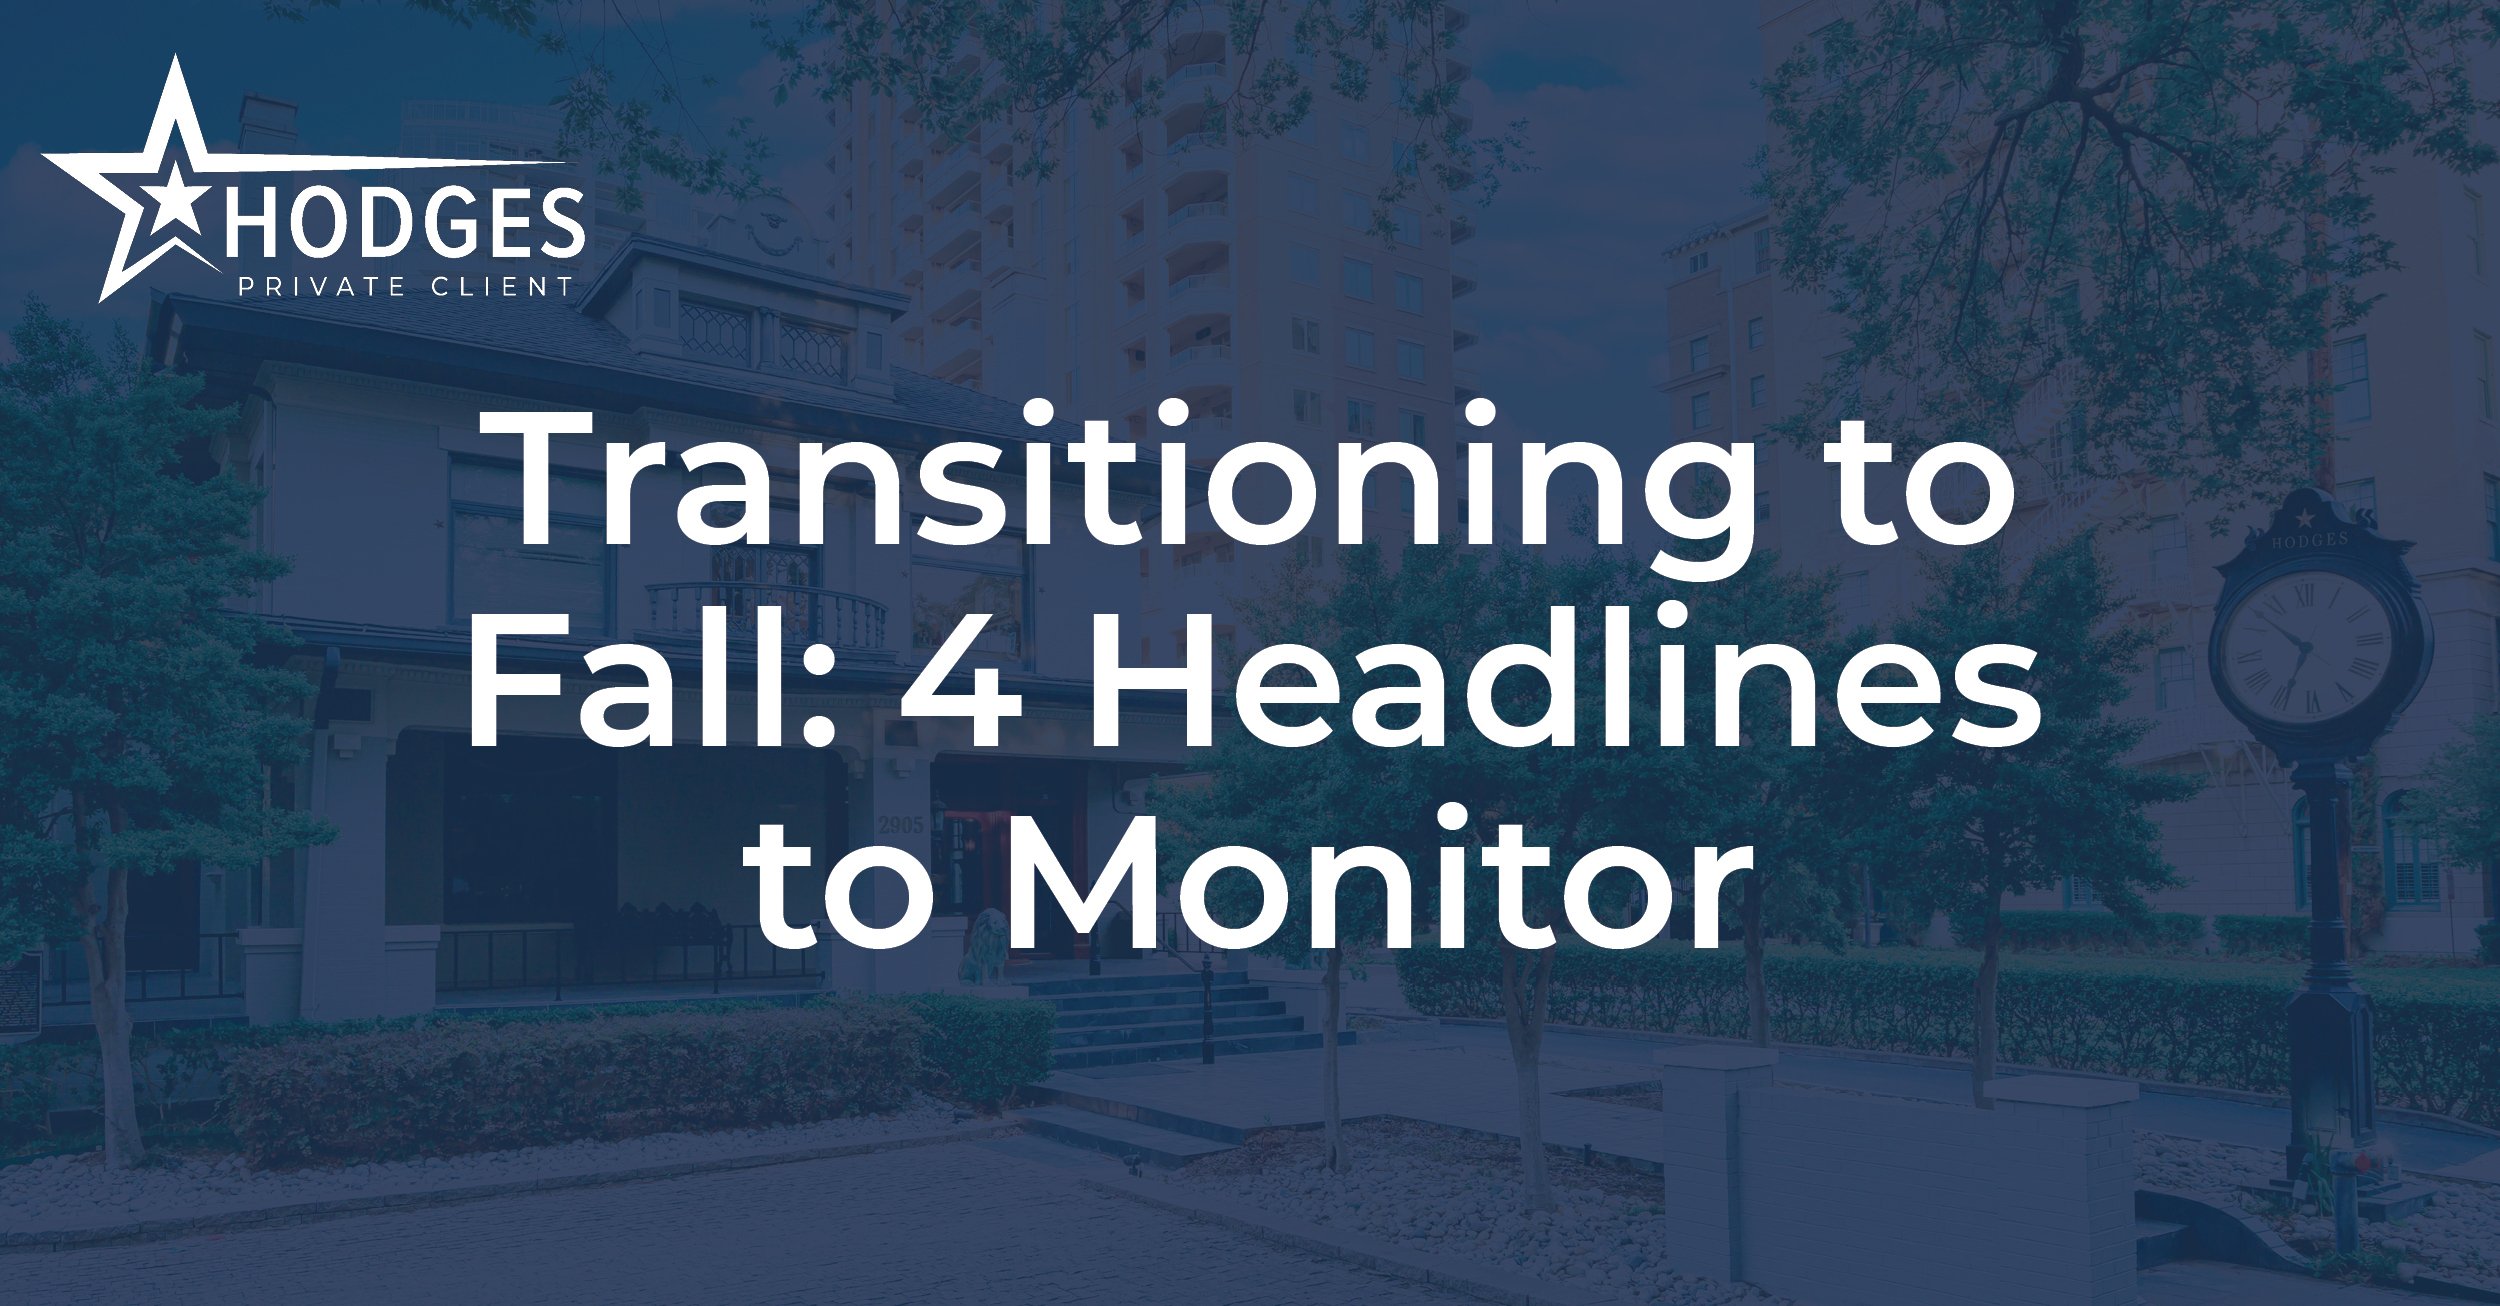 Transitioning to Fall: 4 Headlines to Monitor